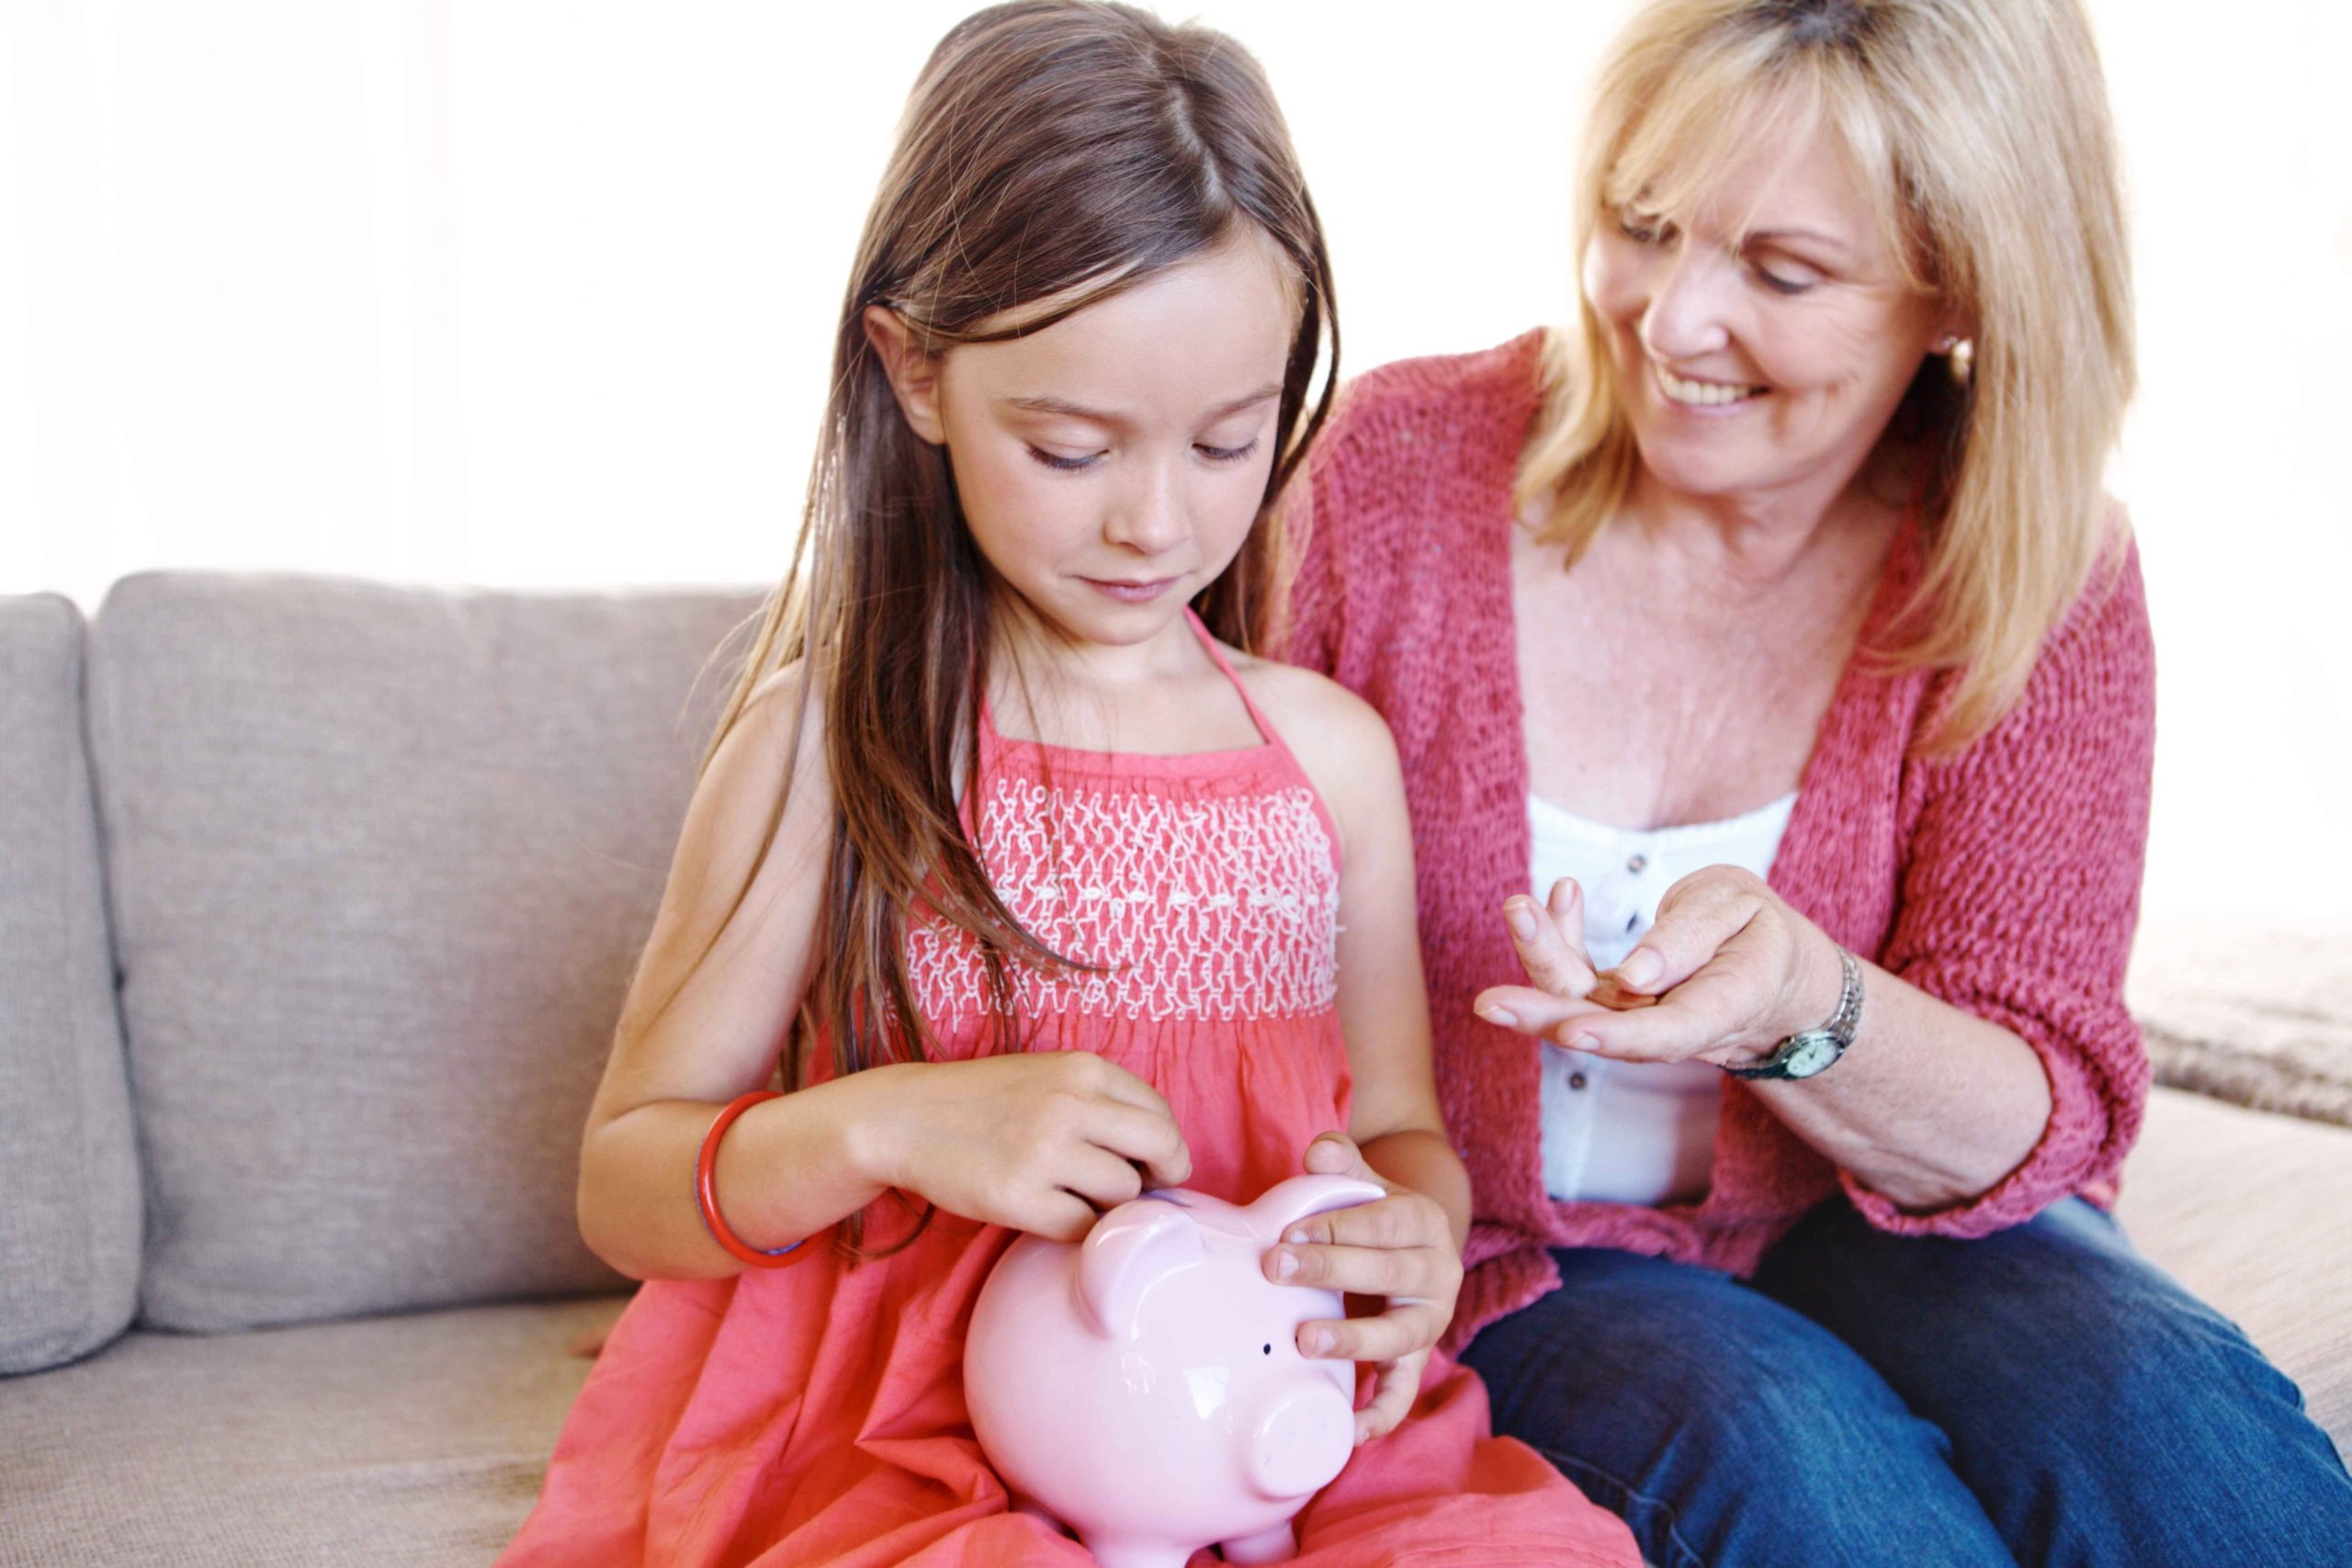 A mother teaches her child about needs vs wants and budgeting for school with a piggy bank.